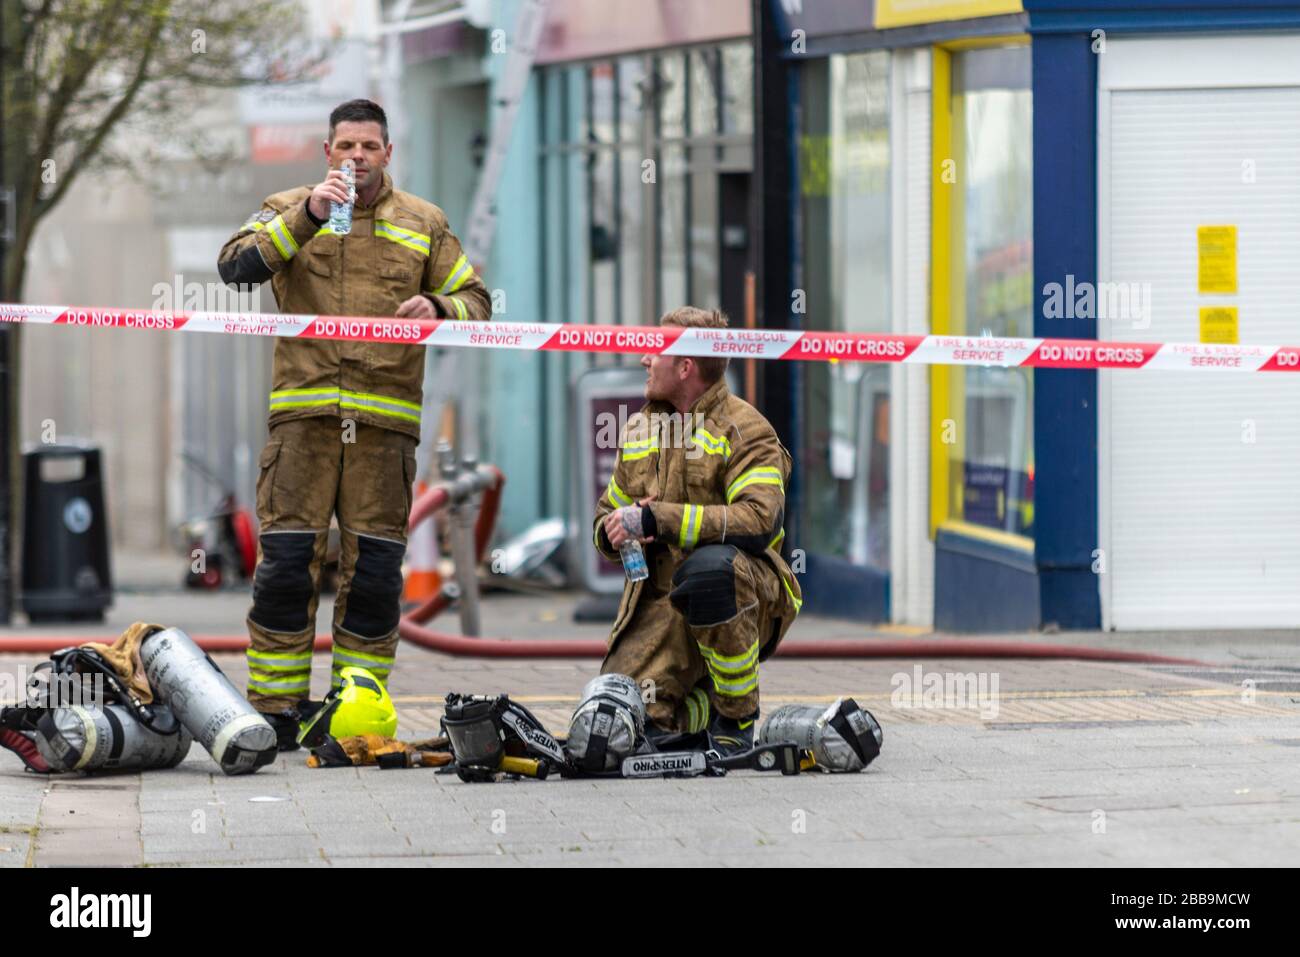 Fire Service dealing with a fire next to Sainsbury's supermarket in Westcliff on Sea, Essex, UK during COVID-19 lockdown. Firefighters recovering Stock Photo